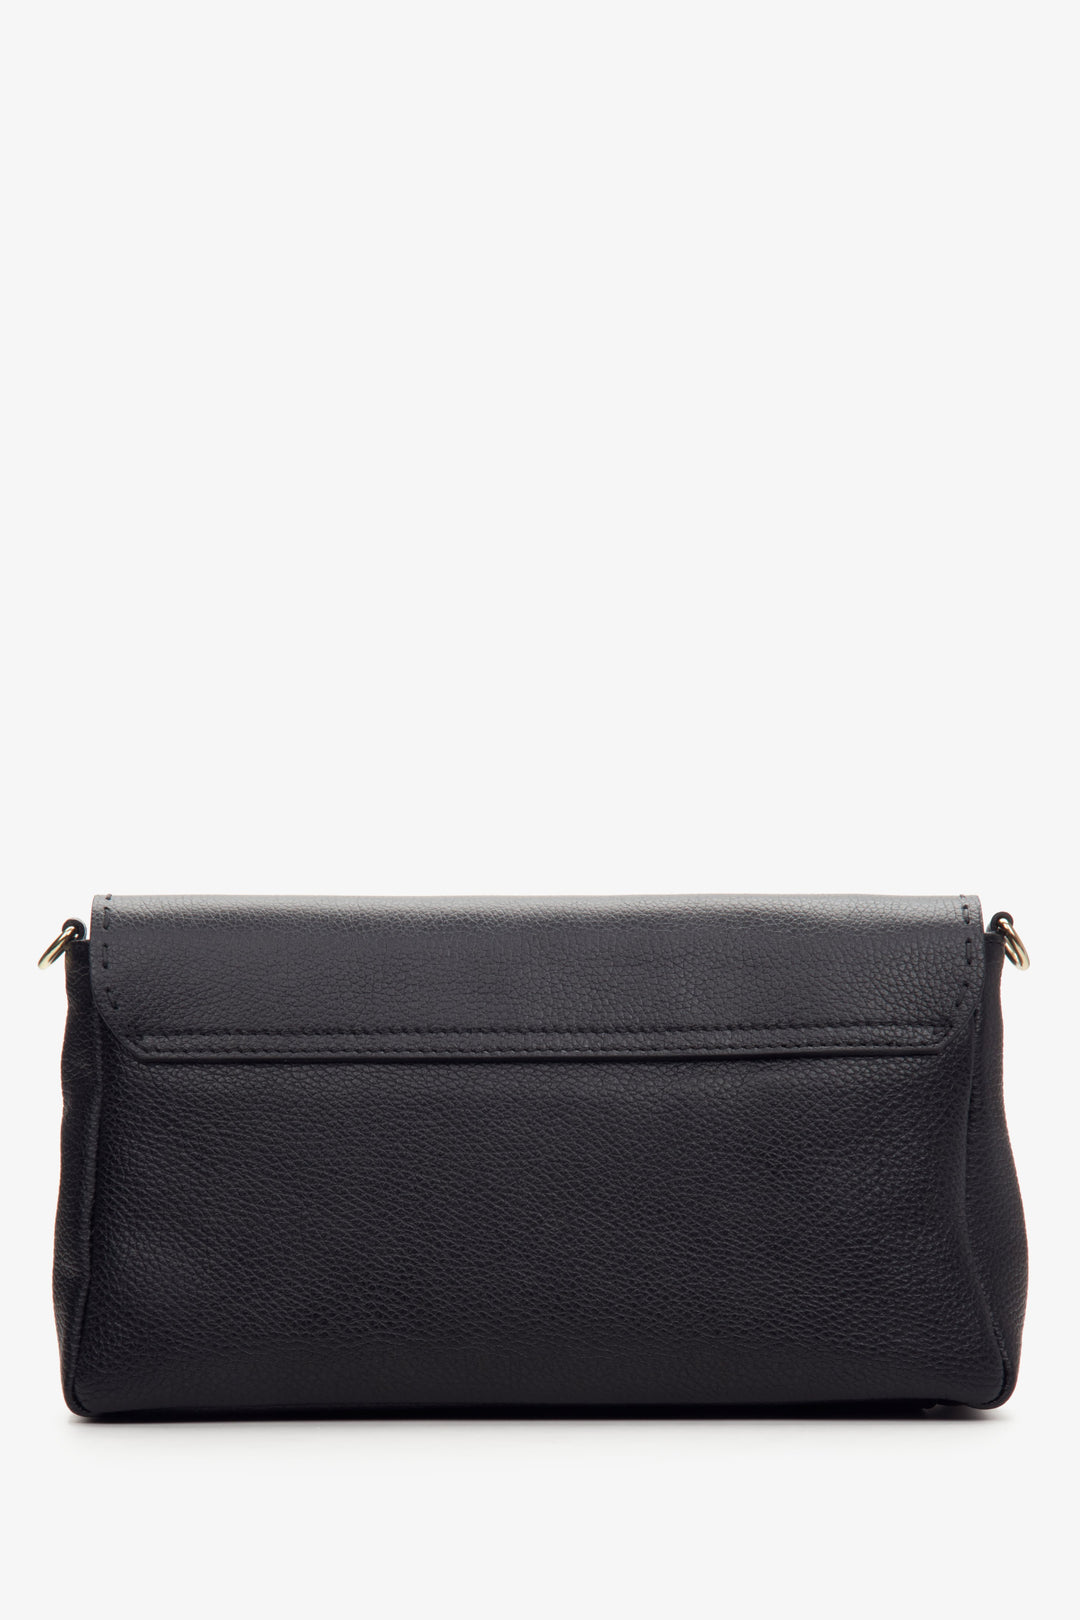 Women's small black handbag made of genuine leather by Estro - back view.